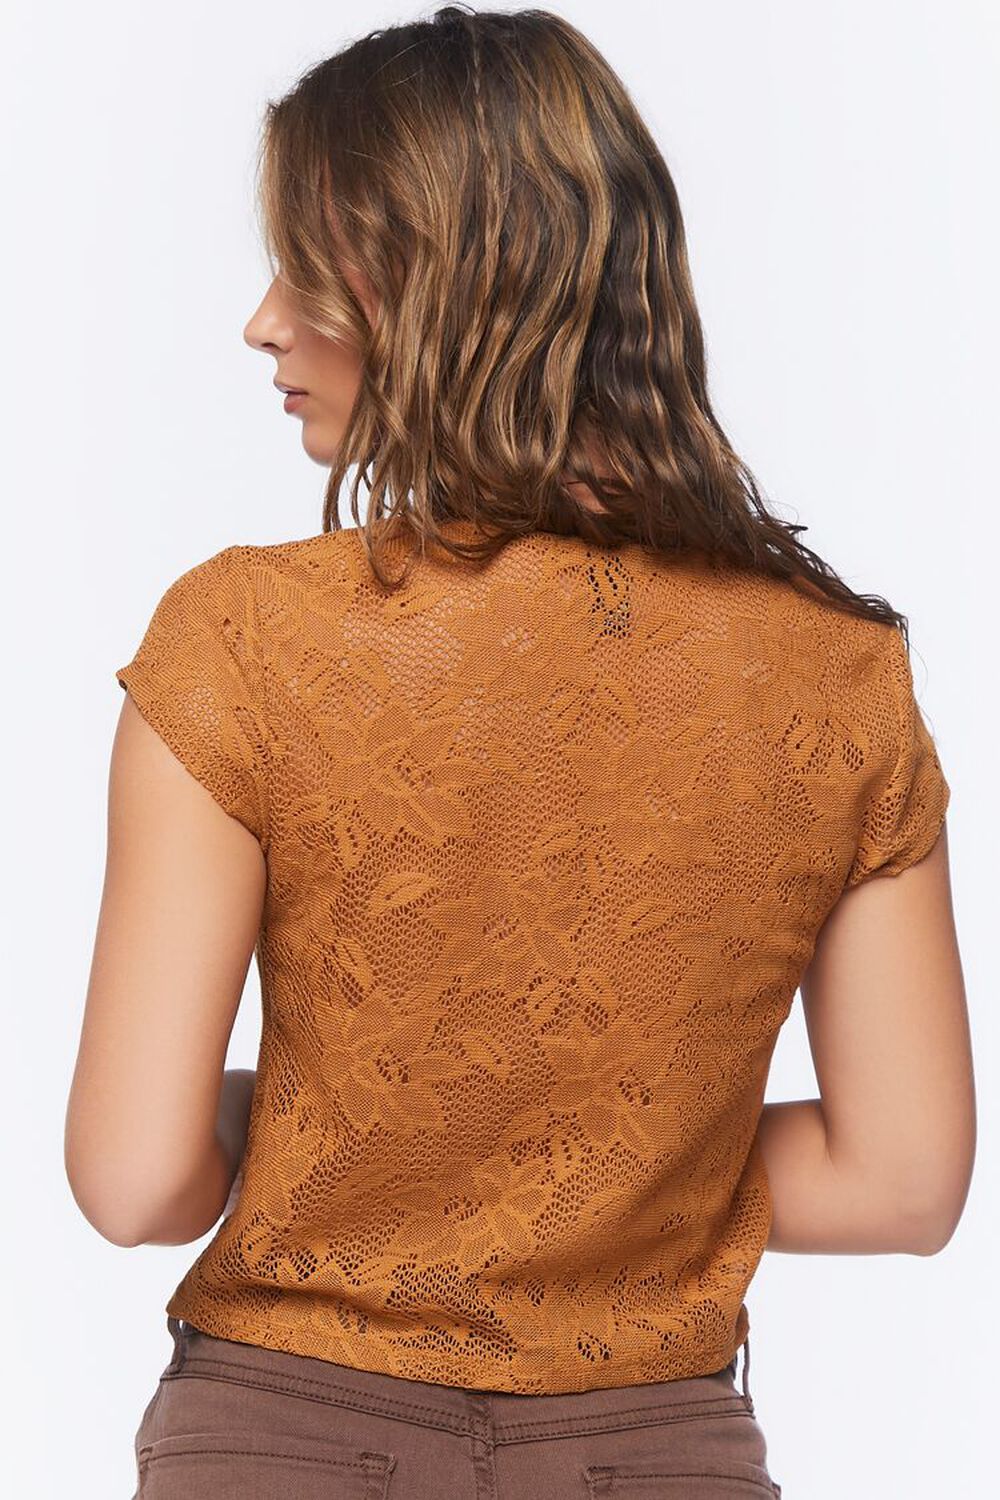 MAPLE Sheer Netted Tie-Front Top, image 3